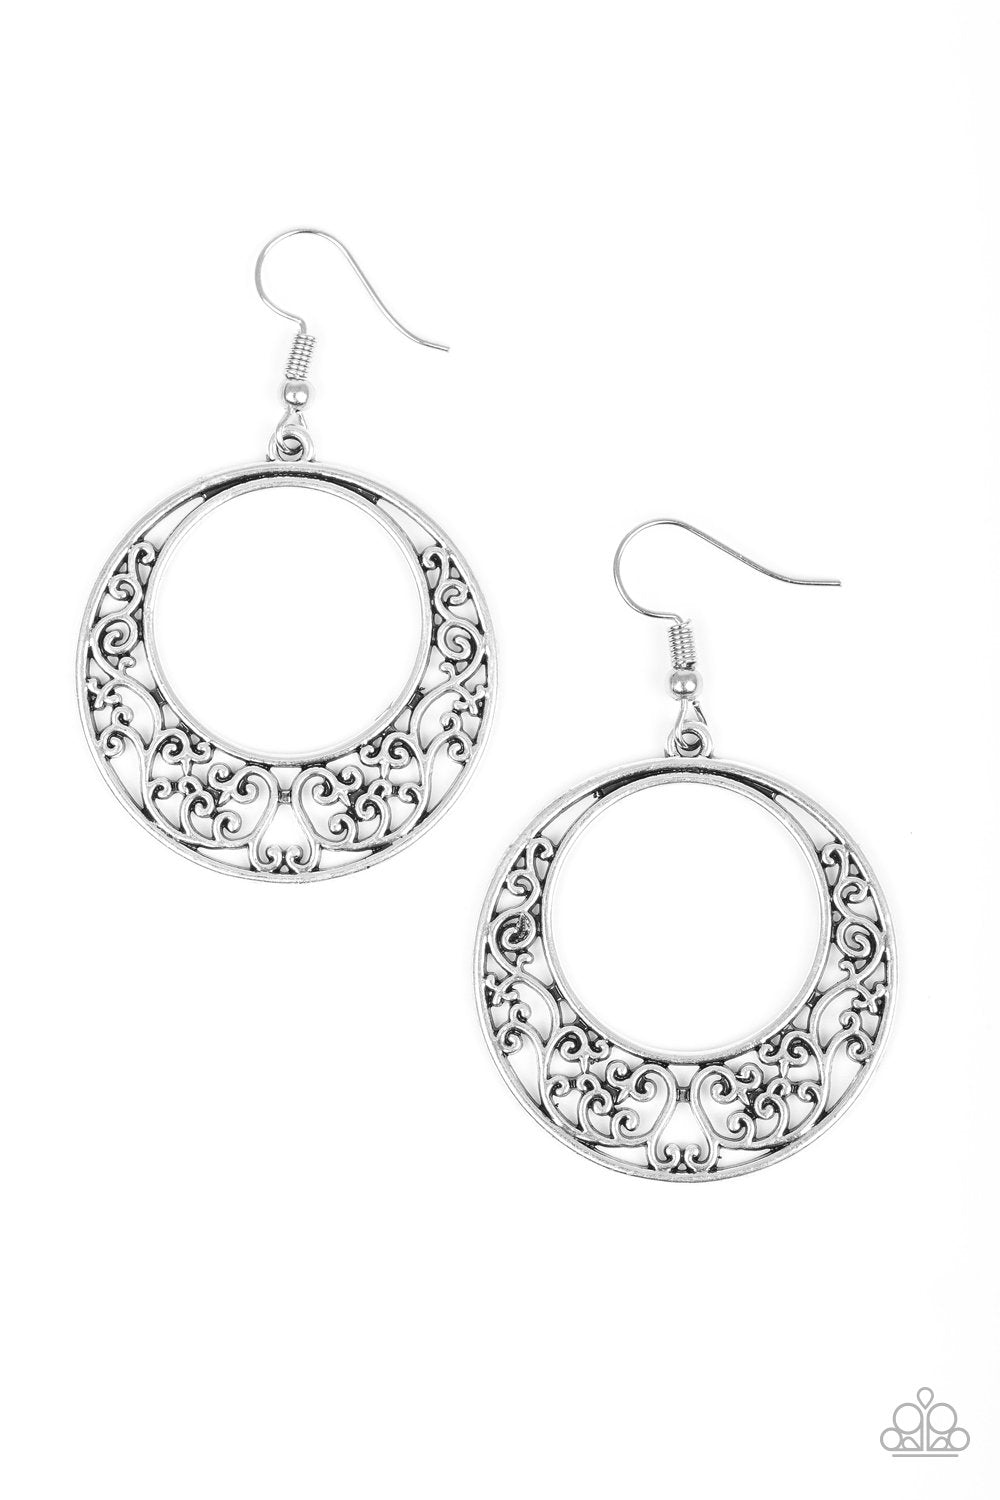 Newport Nautical Silver Earrings - Paparazzi Accessories-CarasShop.com - $5 Jewelry by Cara Jewels